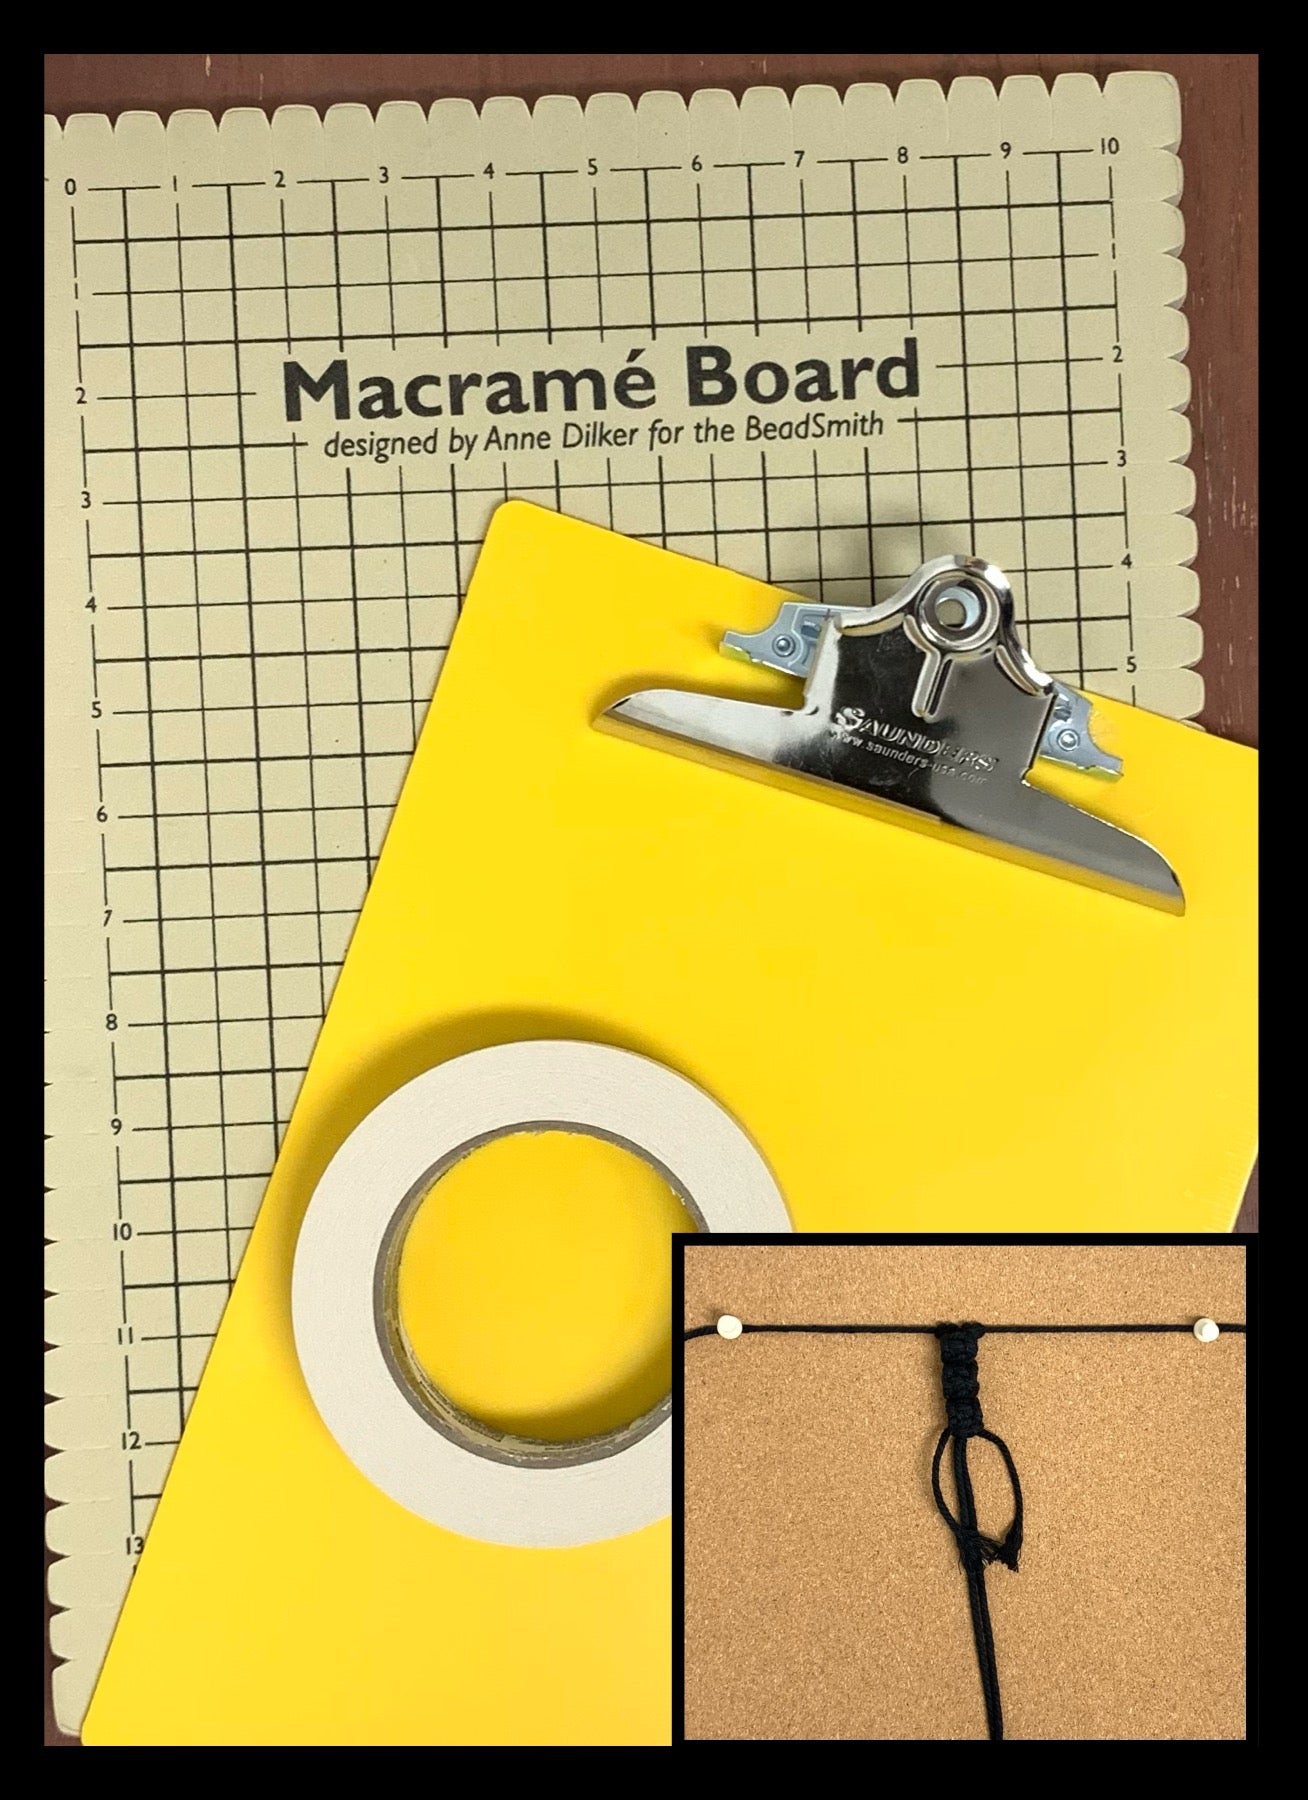 Macrame Board, Clipboard, Masking Tape, and Corkboard with Macrame project posted to it.